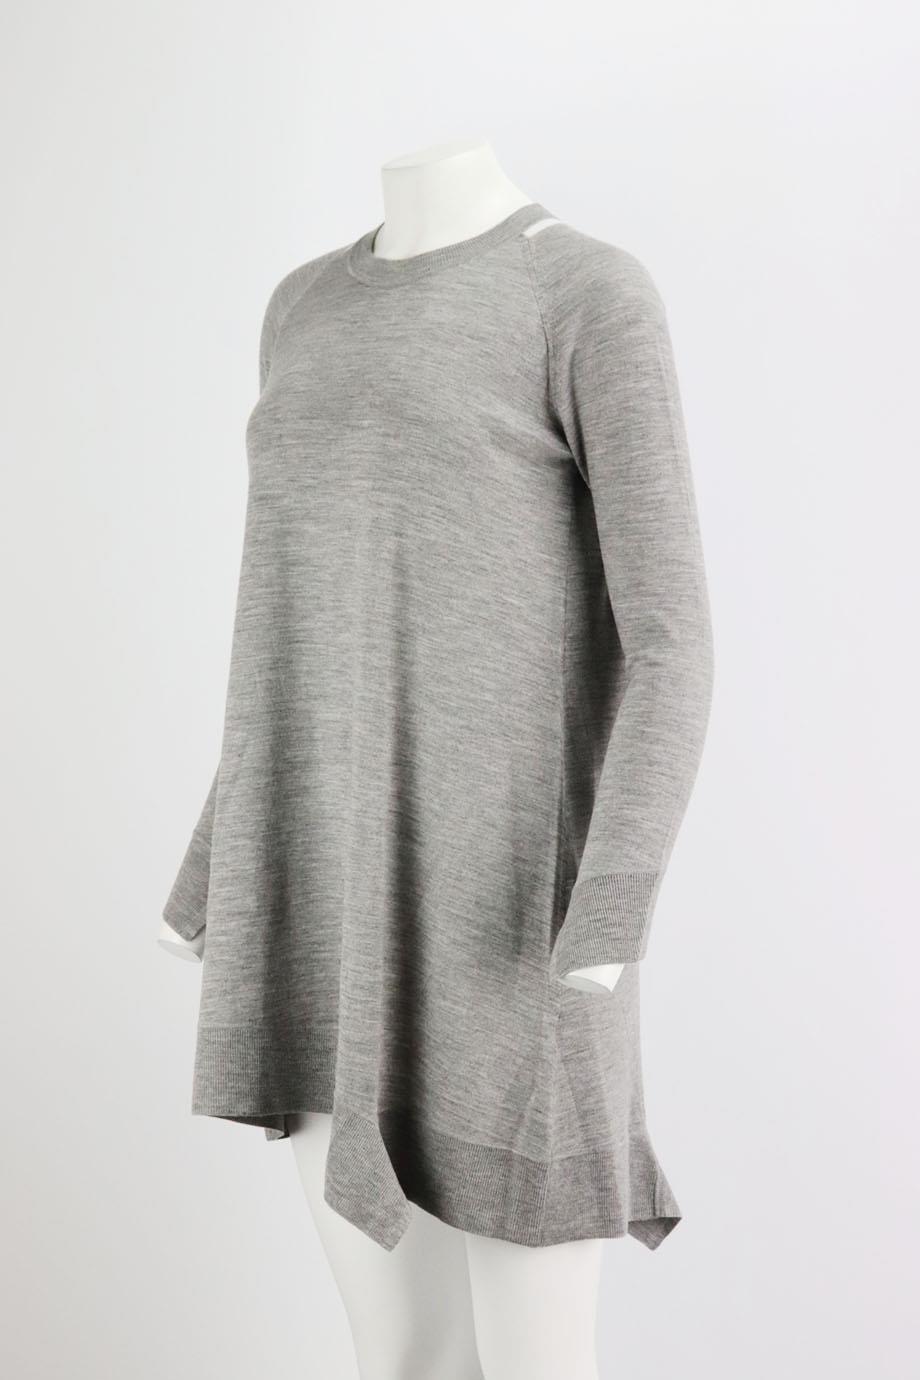 This mini dress by Alexander Wang has been knitted from a blend of wool and spandex with a soft handle and has a asymmetric skirt that moves beautifully. Grey wool-blend. Slips on. 96% Wool, 3% nylon, 1% spandex. Size: XSmall (UK 6, US 2, FR 34, IT